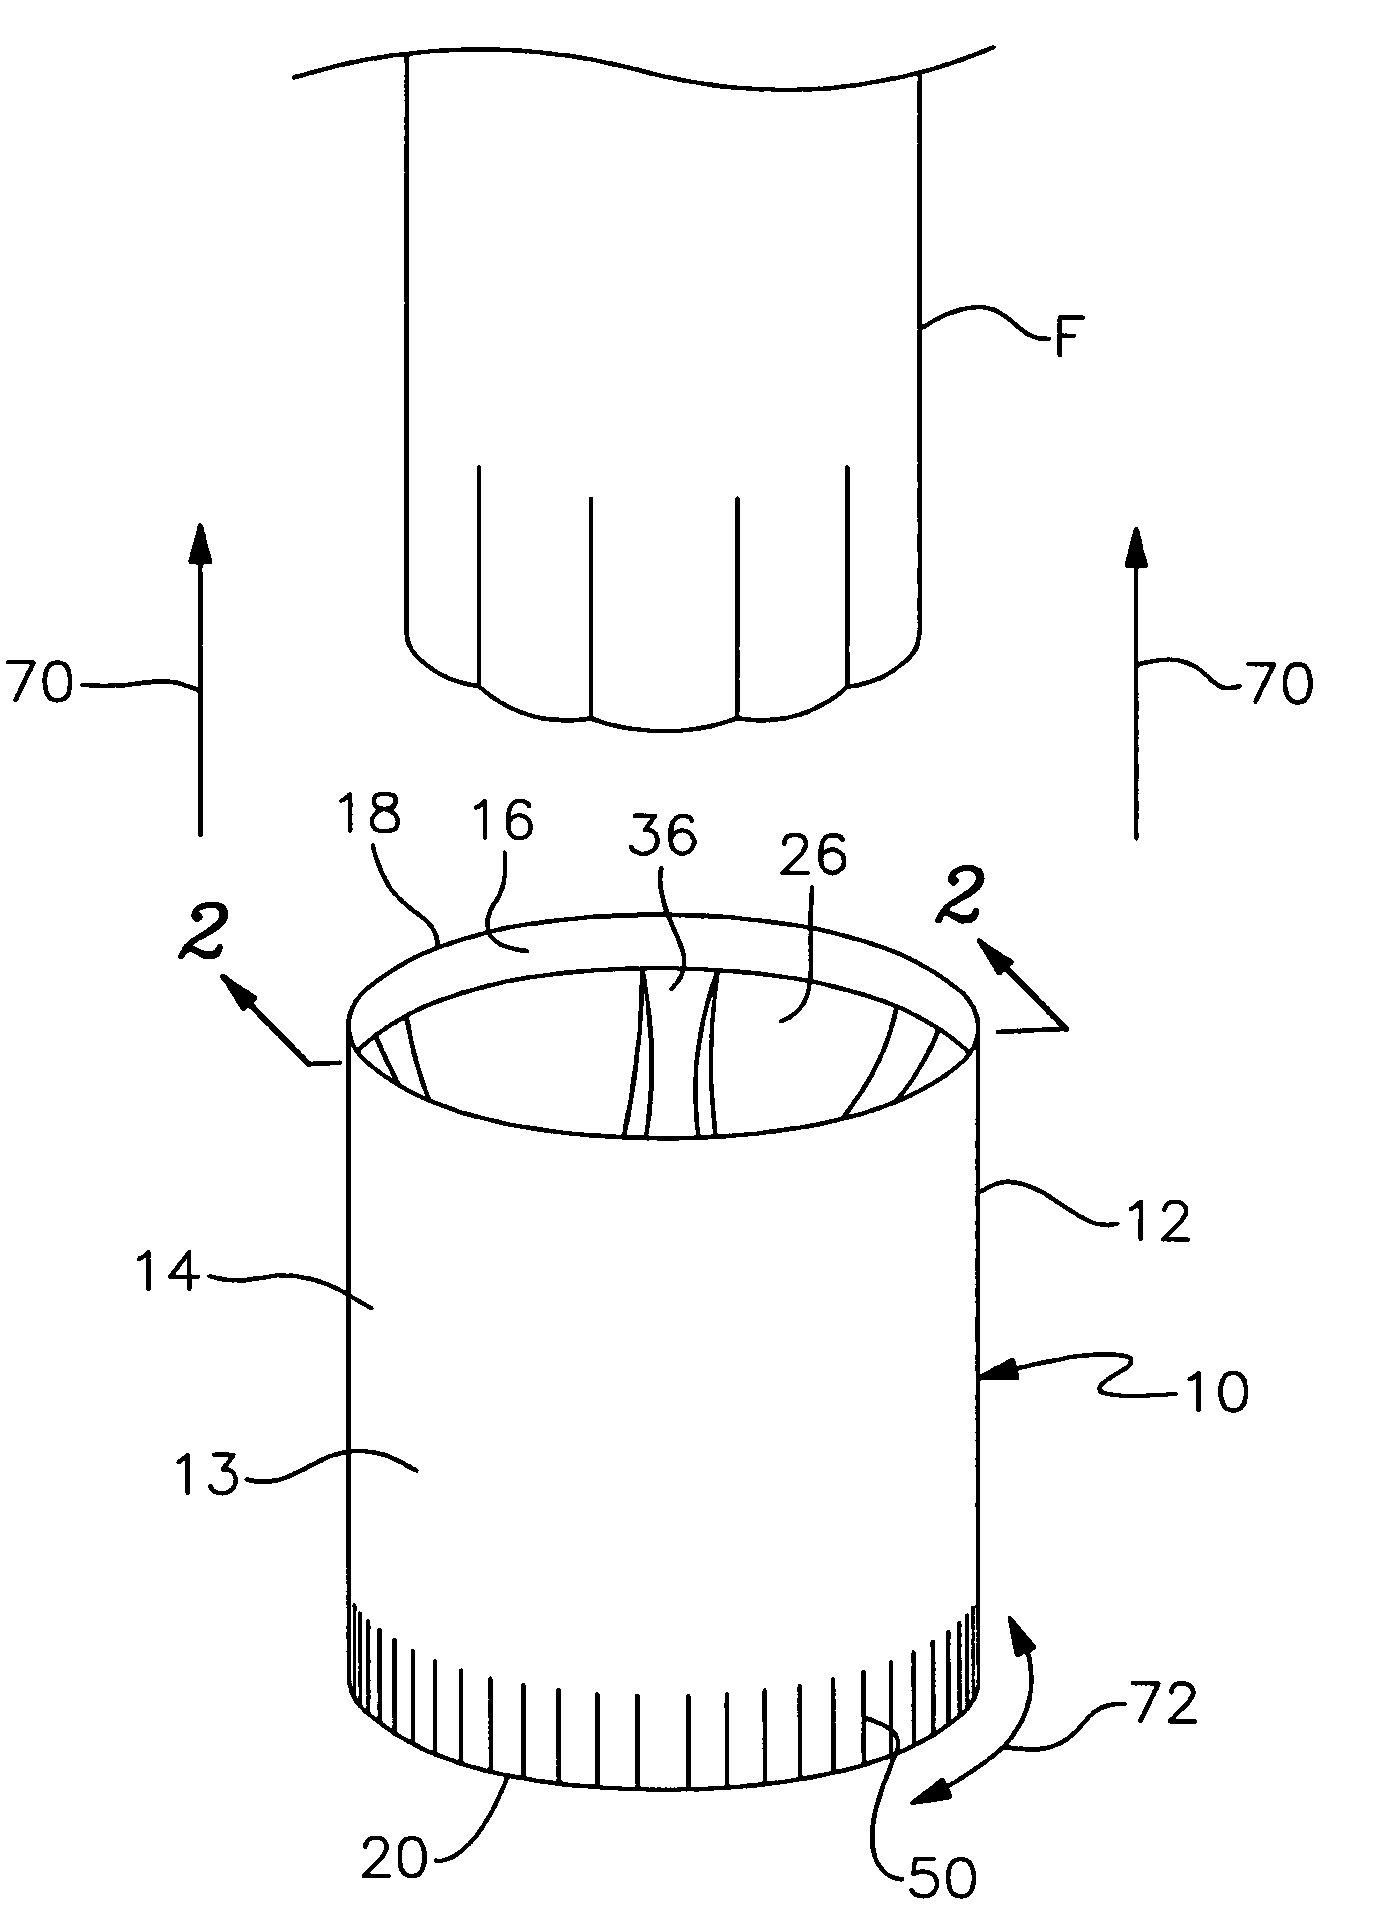 Tool with integral fluid reservoir for handling oil and fuel filters